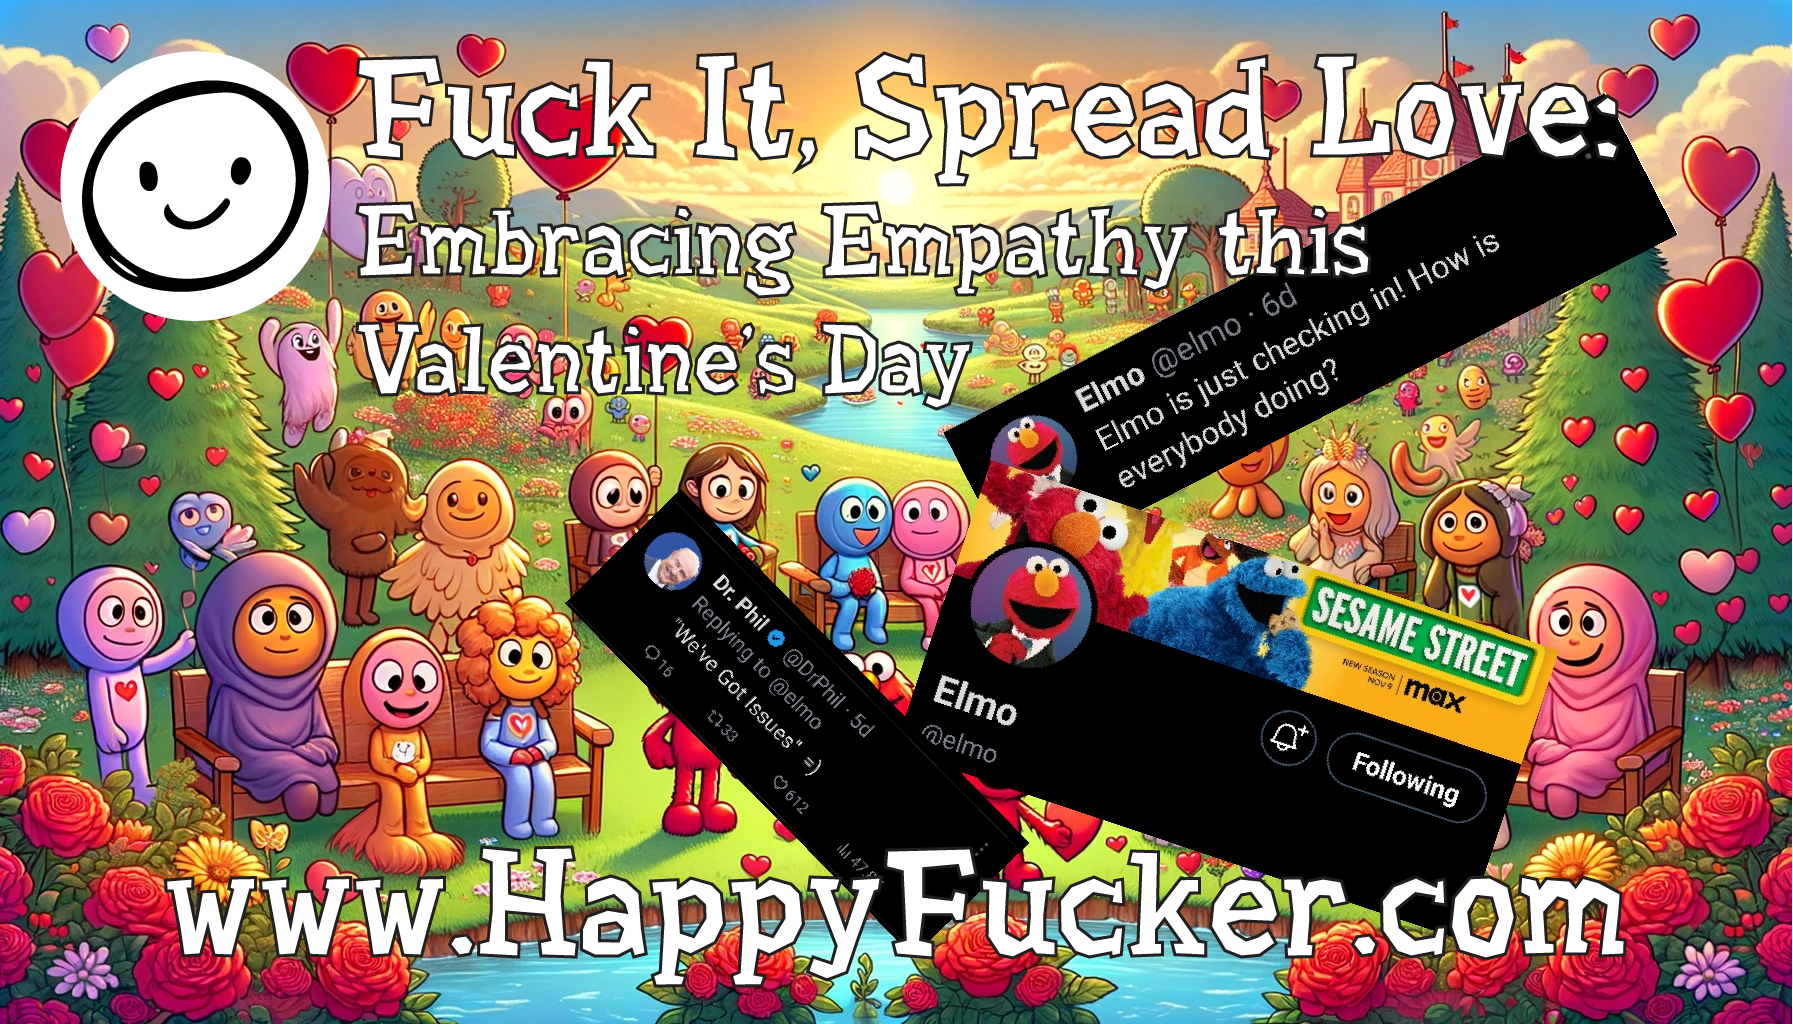 Fuck It, Spread Love: Embracing Empathy this Valentine's Day